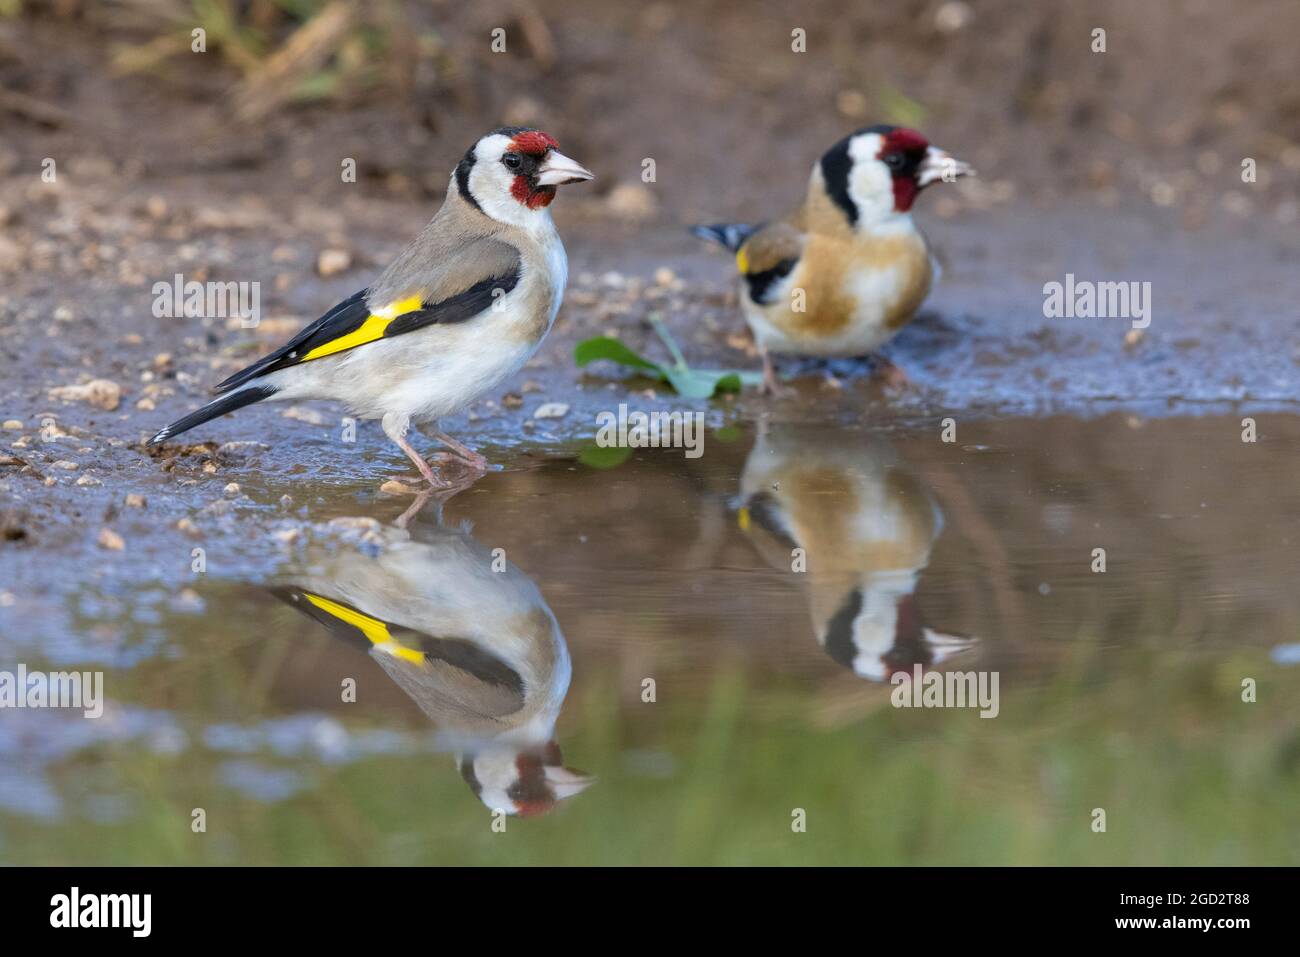 European Goldfinch (Carduelis carduelis), two adults standing in a puddle, Abruzzo, Italy Stock Photo